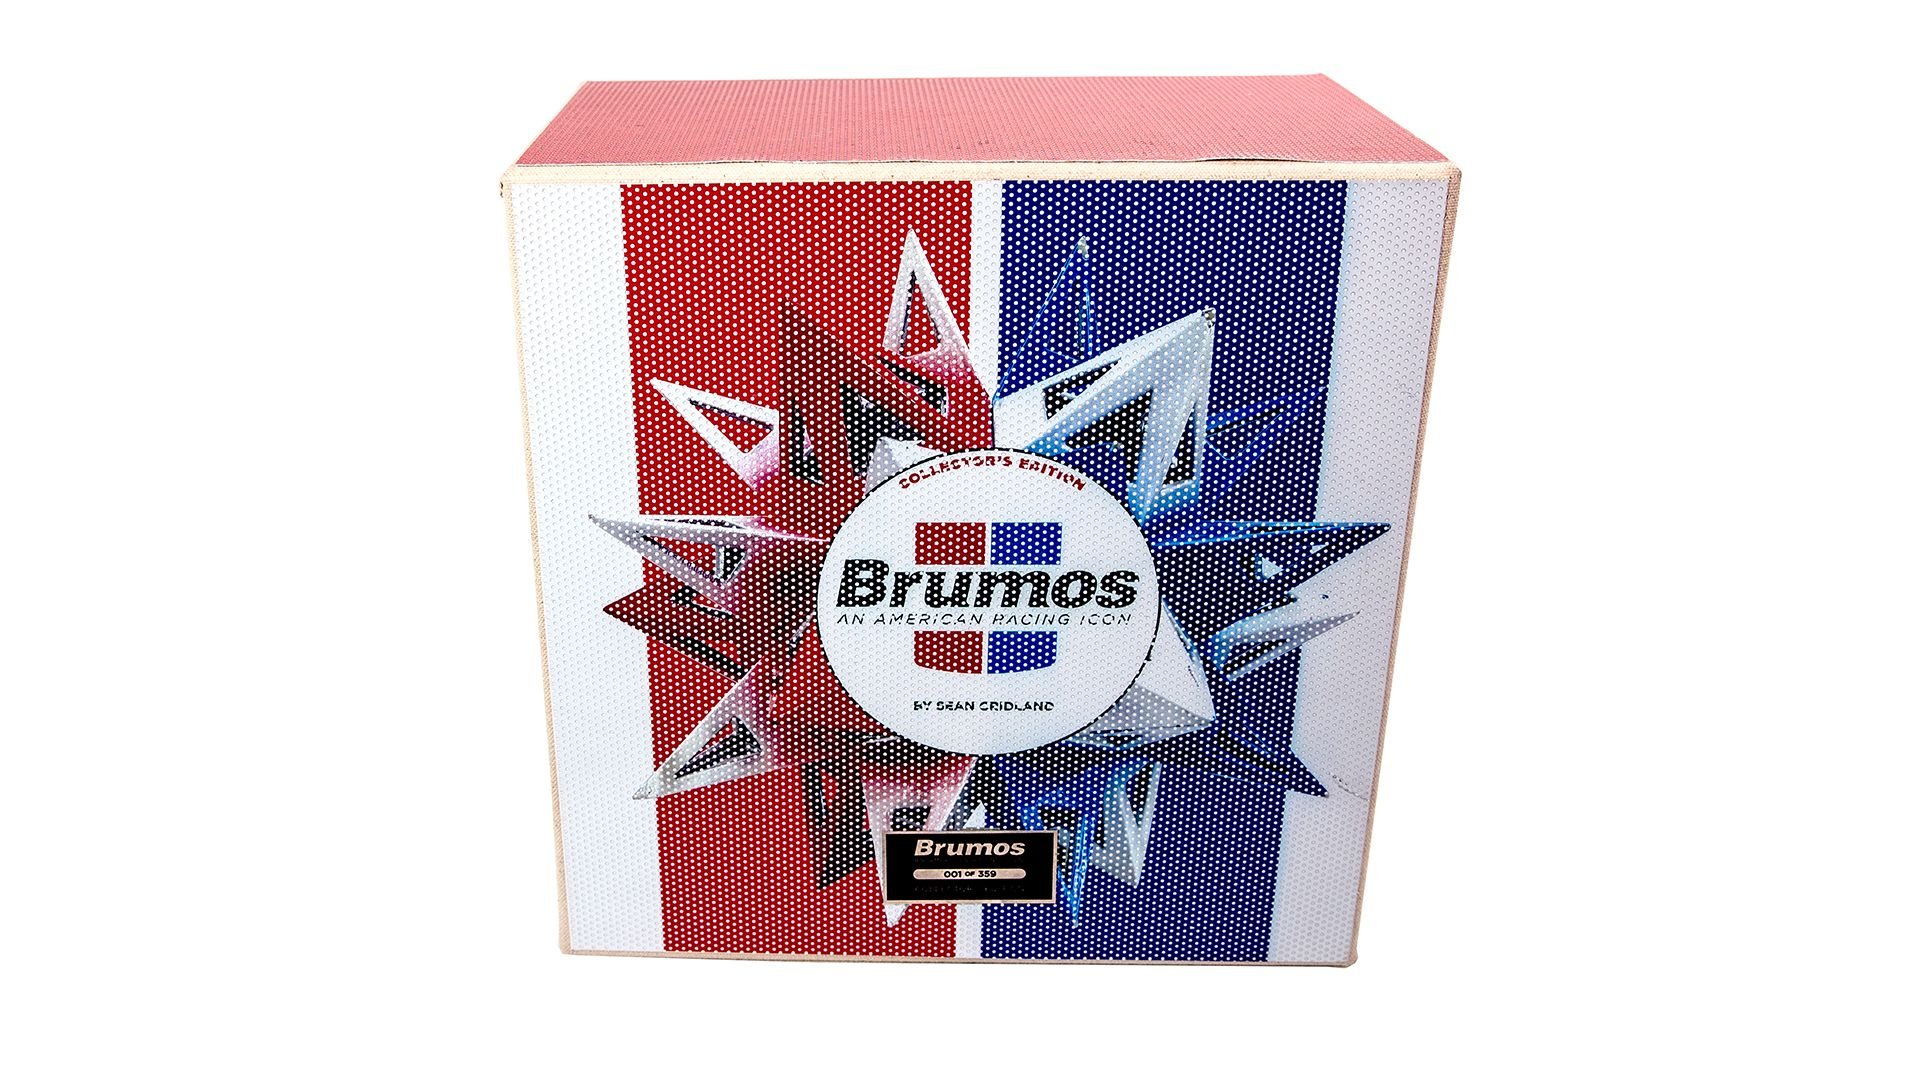 Broad Arrow Auctions | BRUMOS: An American Racing Icon Numbered Collector's Edition by Frank Stella